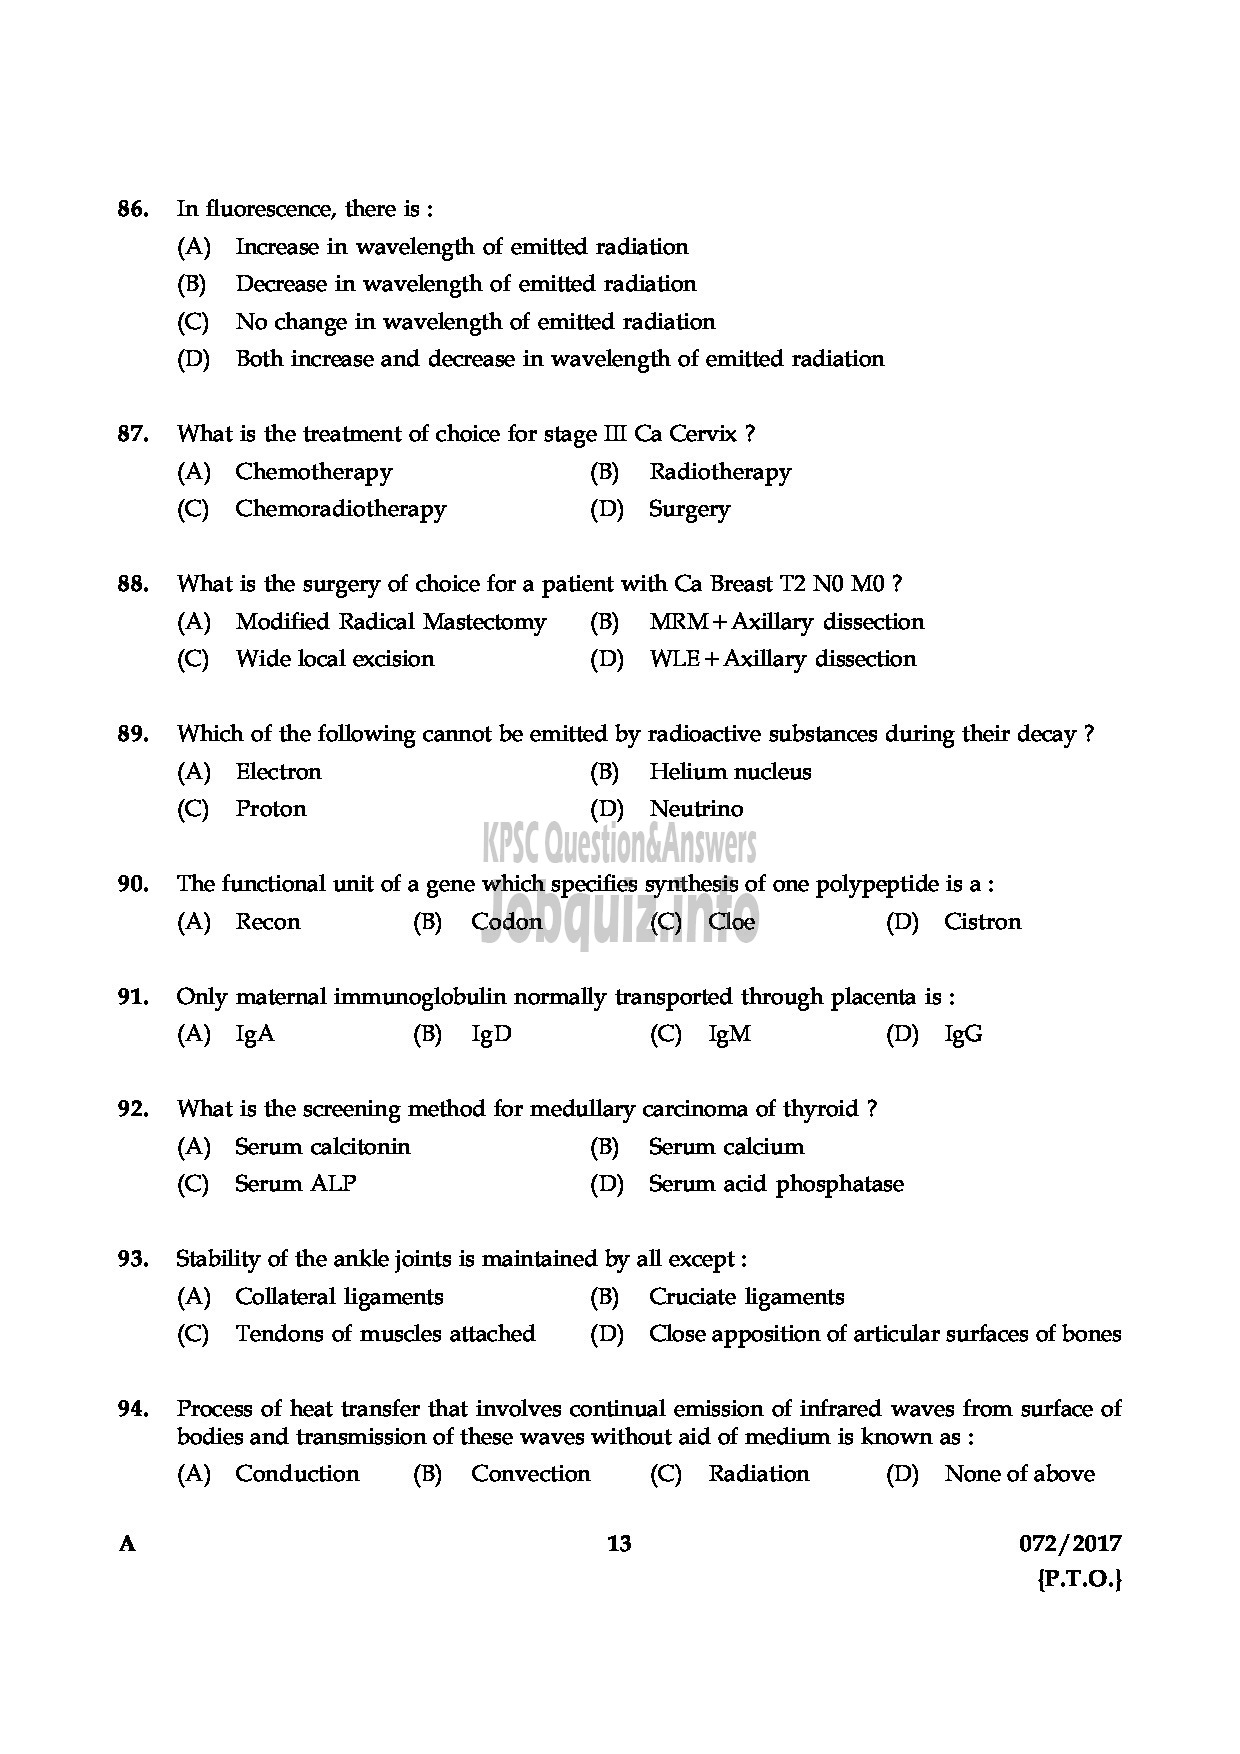 Kerala PSC Question Paper - RADIOGRAPHER GR.II HEALTH SERVICES QUESTION PAPER-12